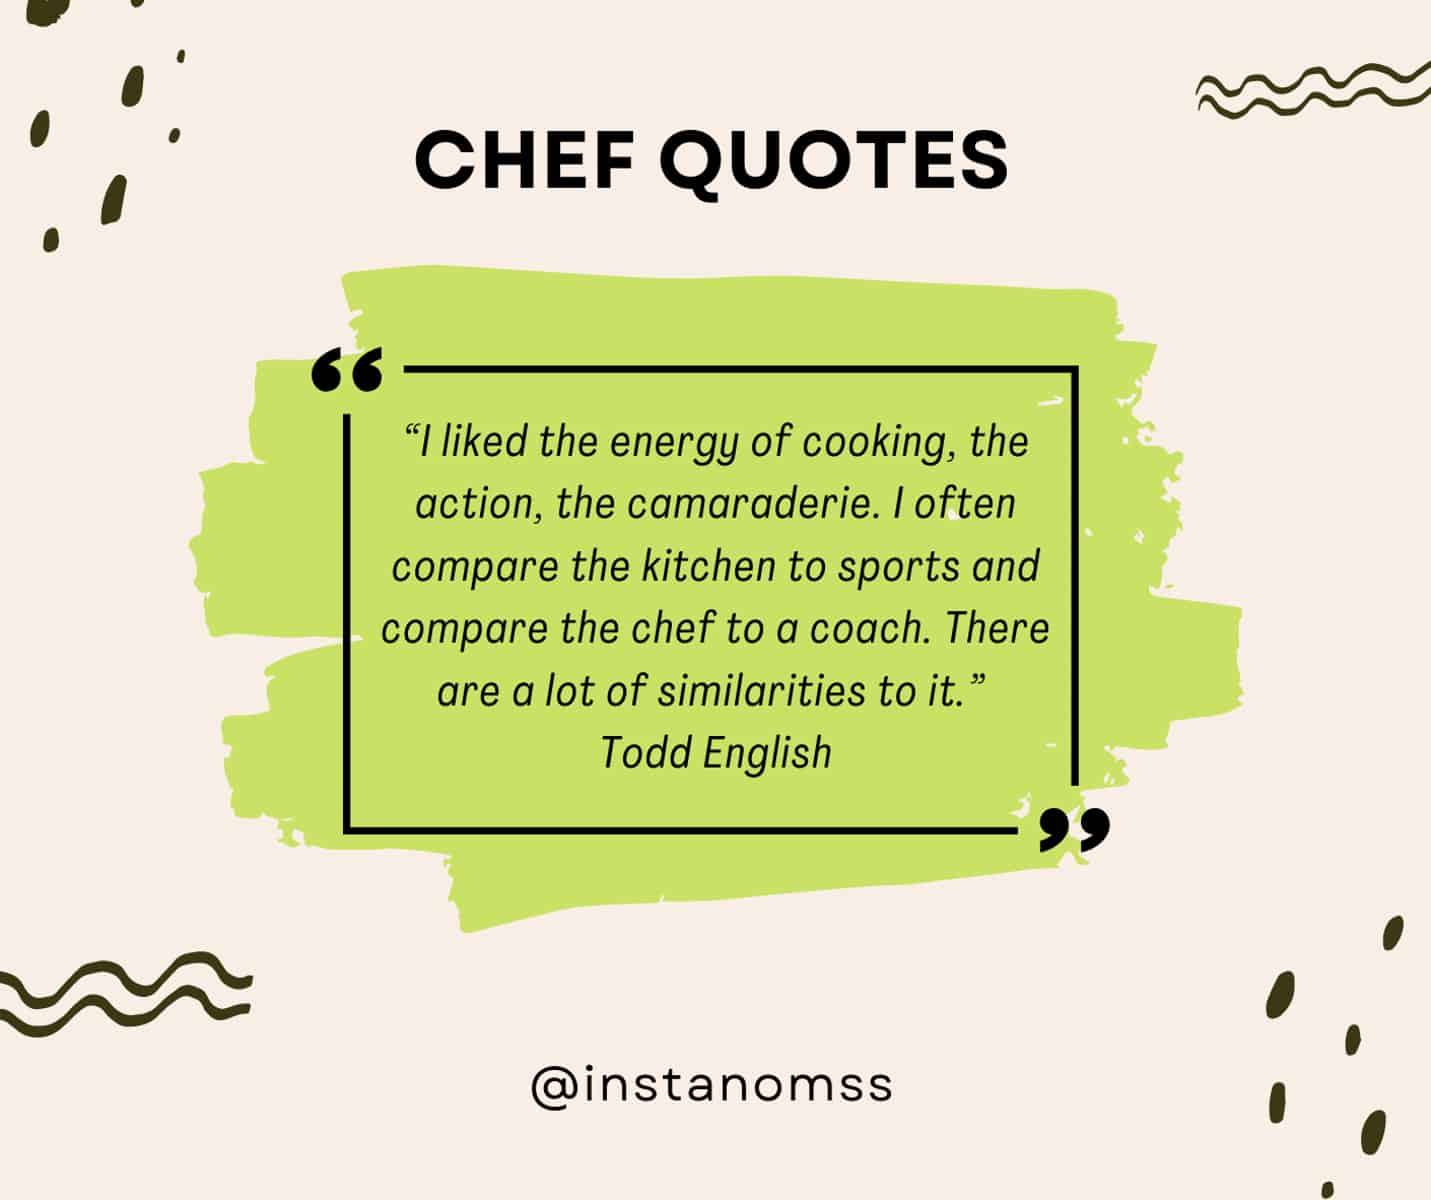 “I liked the energy of cooking, the action, the camaraderie. I often compare the kitchen to sports and compare the chef to a coach. There are a lot of similarities to it.” Todd English